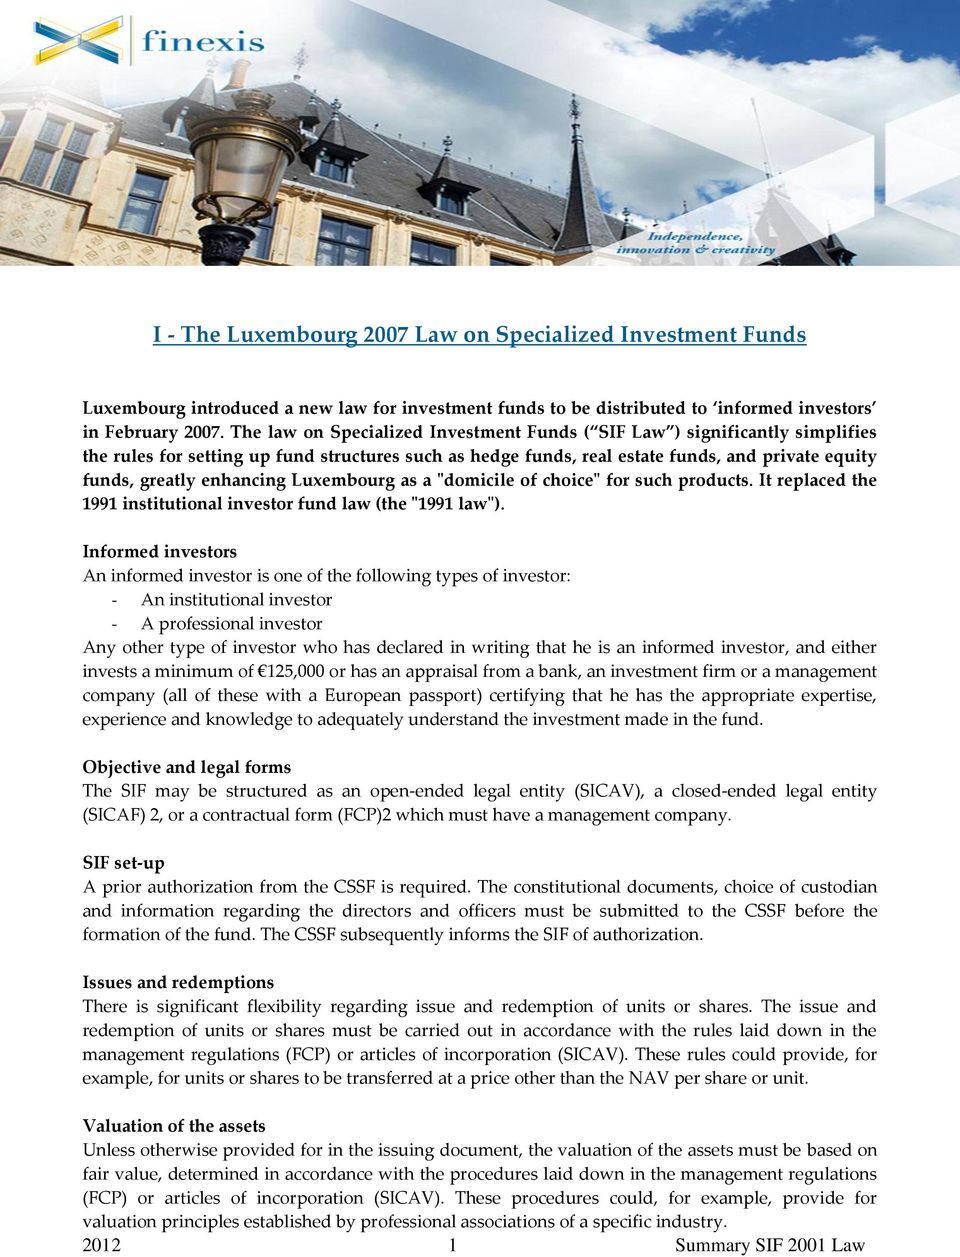 enhancing Luxembourg as a "domicile of choice" for such products. It replaced the 1991 institutional investor fund law (the "1991 law").